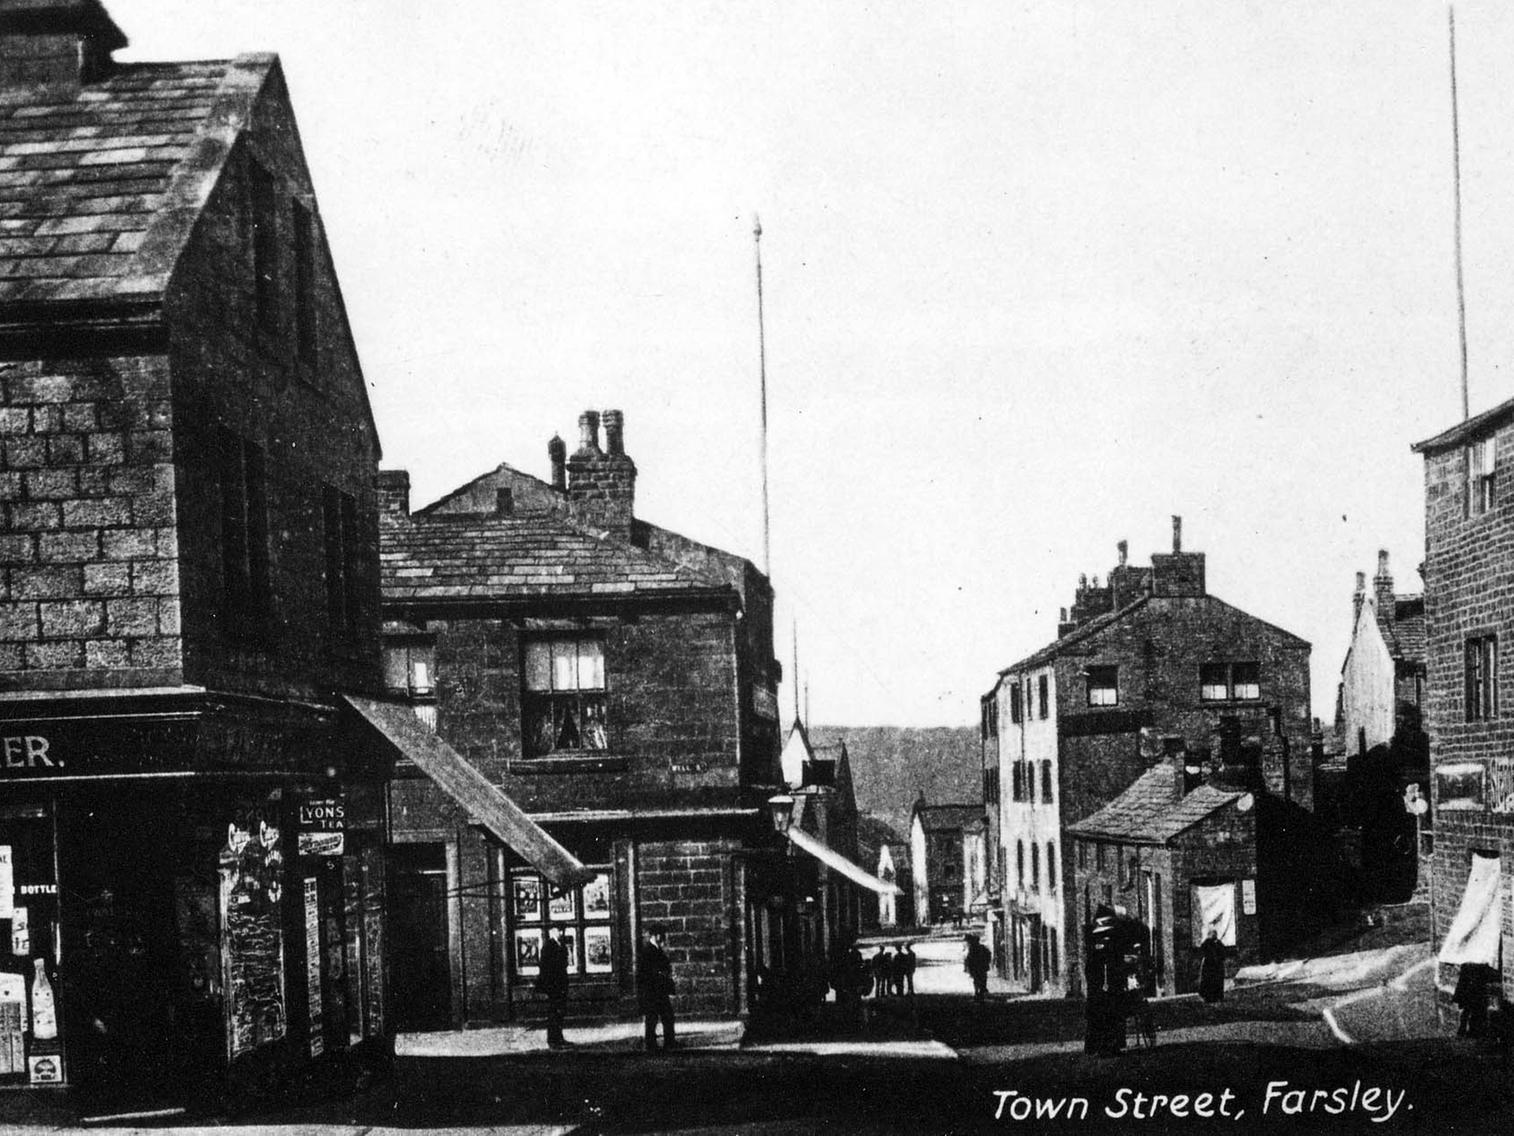 A view looking north along Farsley Town Street. On the left is W.J. Walker, grocer and beer retailer on Croft street. Road on the right is Gambles Hill.